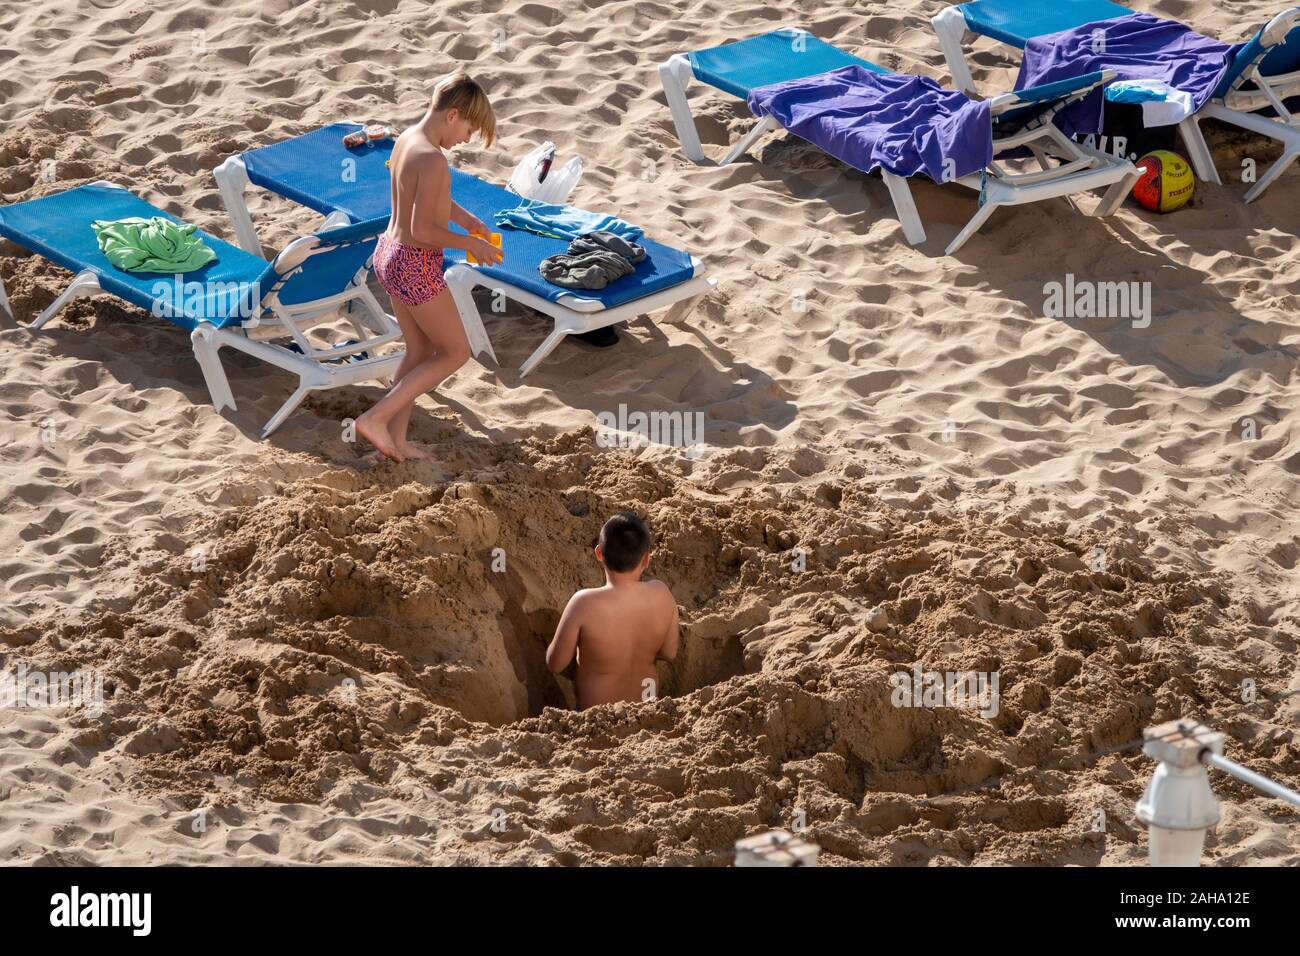 Benidorm, Alicante Province, Spain. 27th December 2019. Soaring temperatures in Spain guarantee a tan for these British tourists enjoying their break in the winter sun away from cold wet Britain. Stock Photo